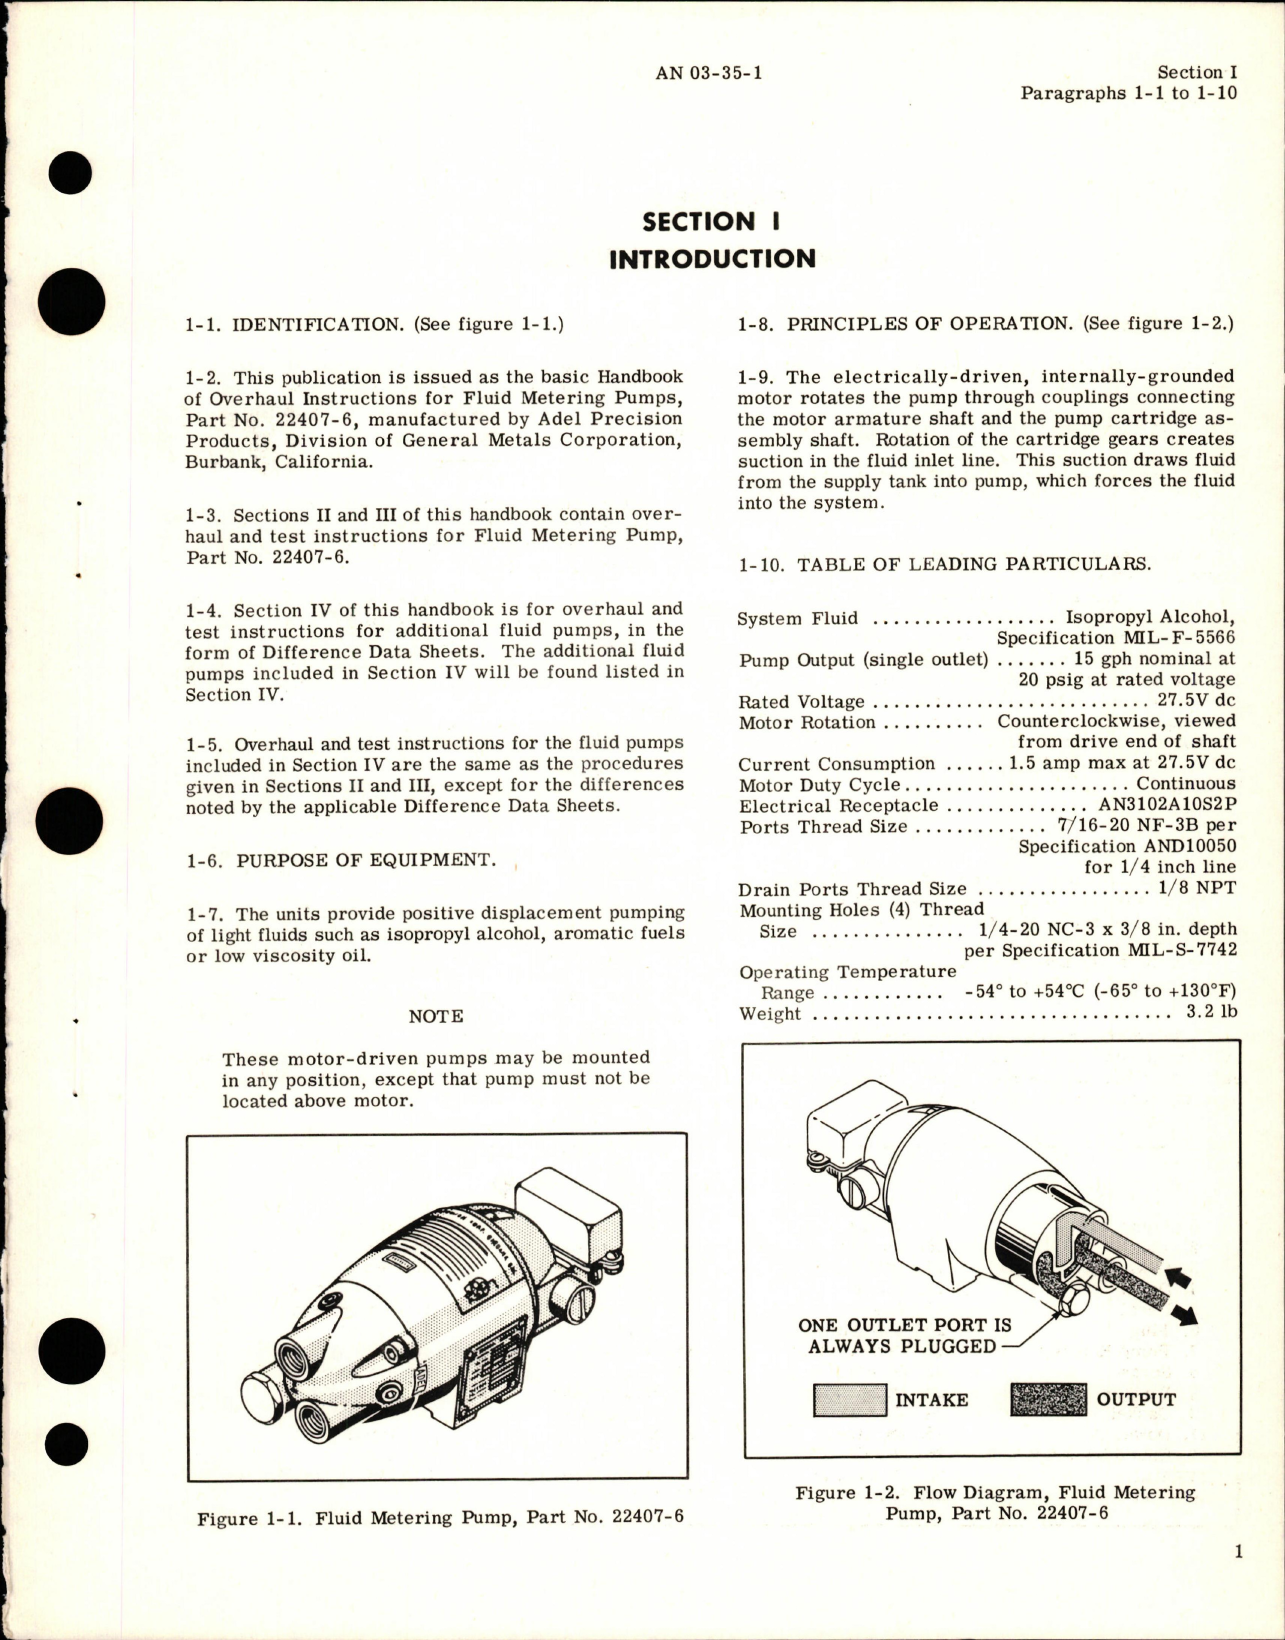 Sample page 5 from AirCorps Library document: Overhaul Instructions for Fluid Metering Pumps - Part 22407-1, 22407-2, and 22407-6 